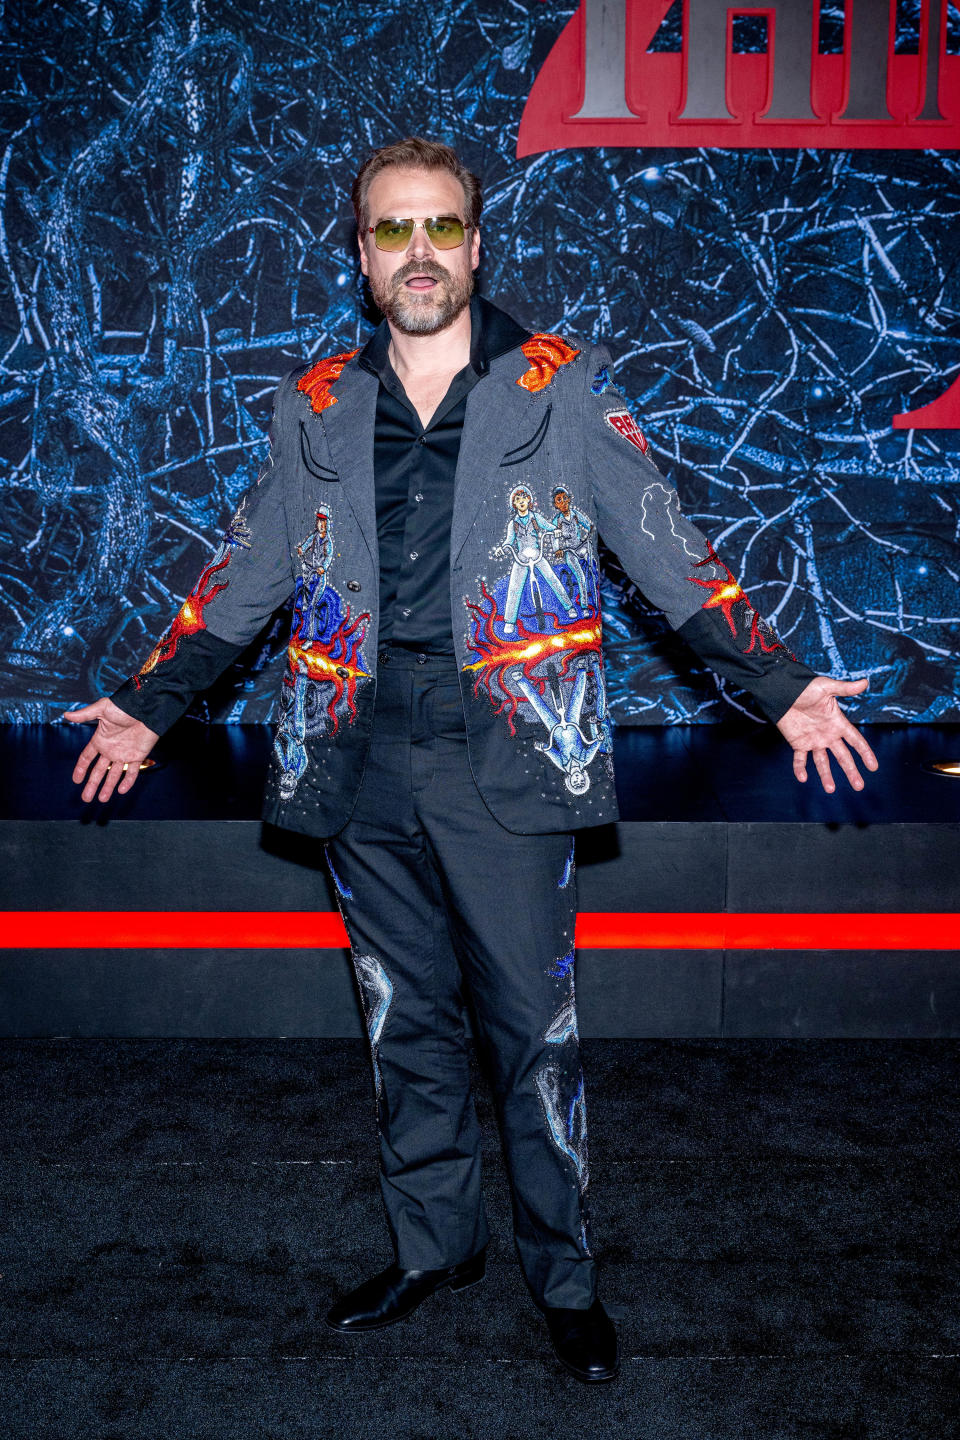 David in a wildly different outfit; this time, it's a custom suit colorfully emblazoned with images from Stranger Things